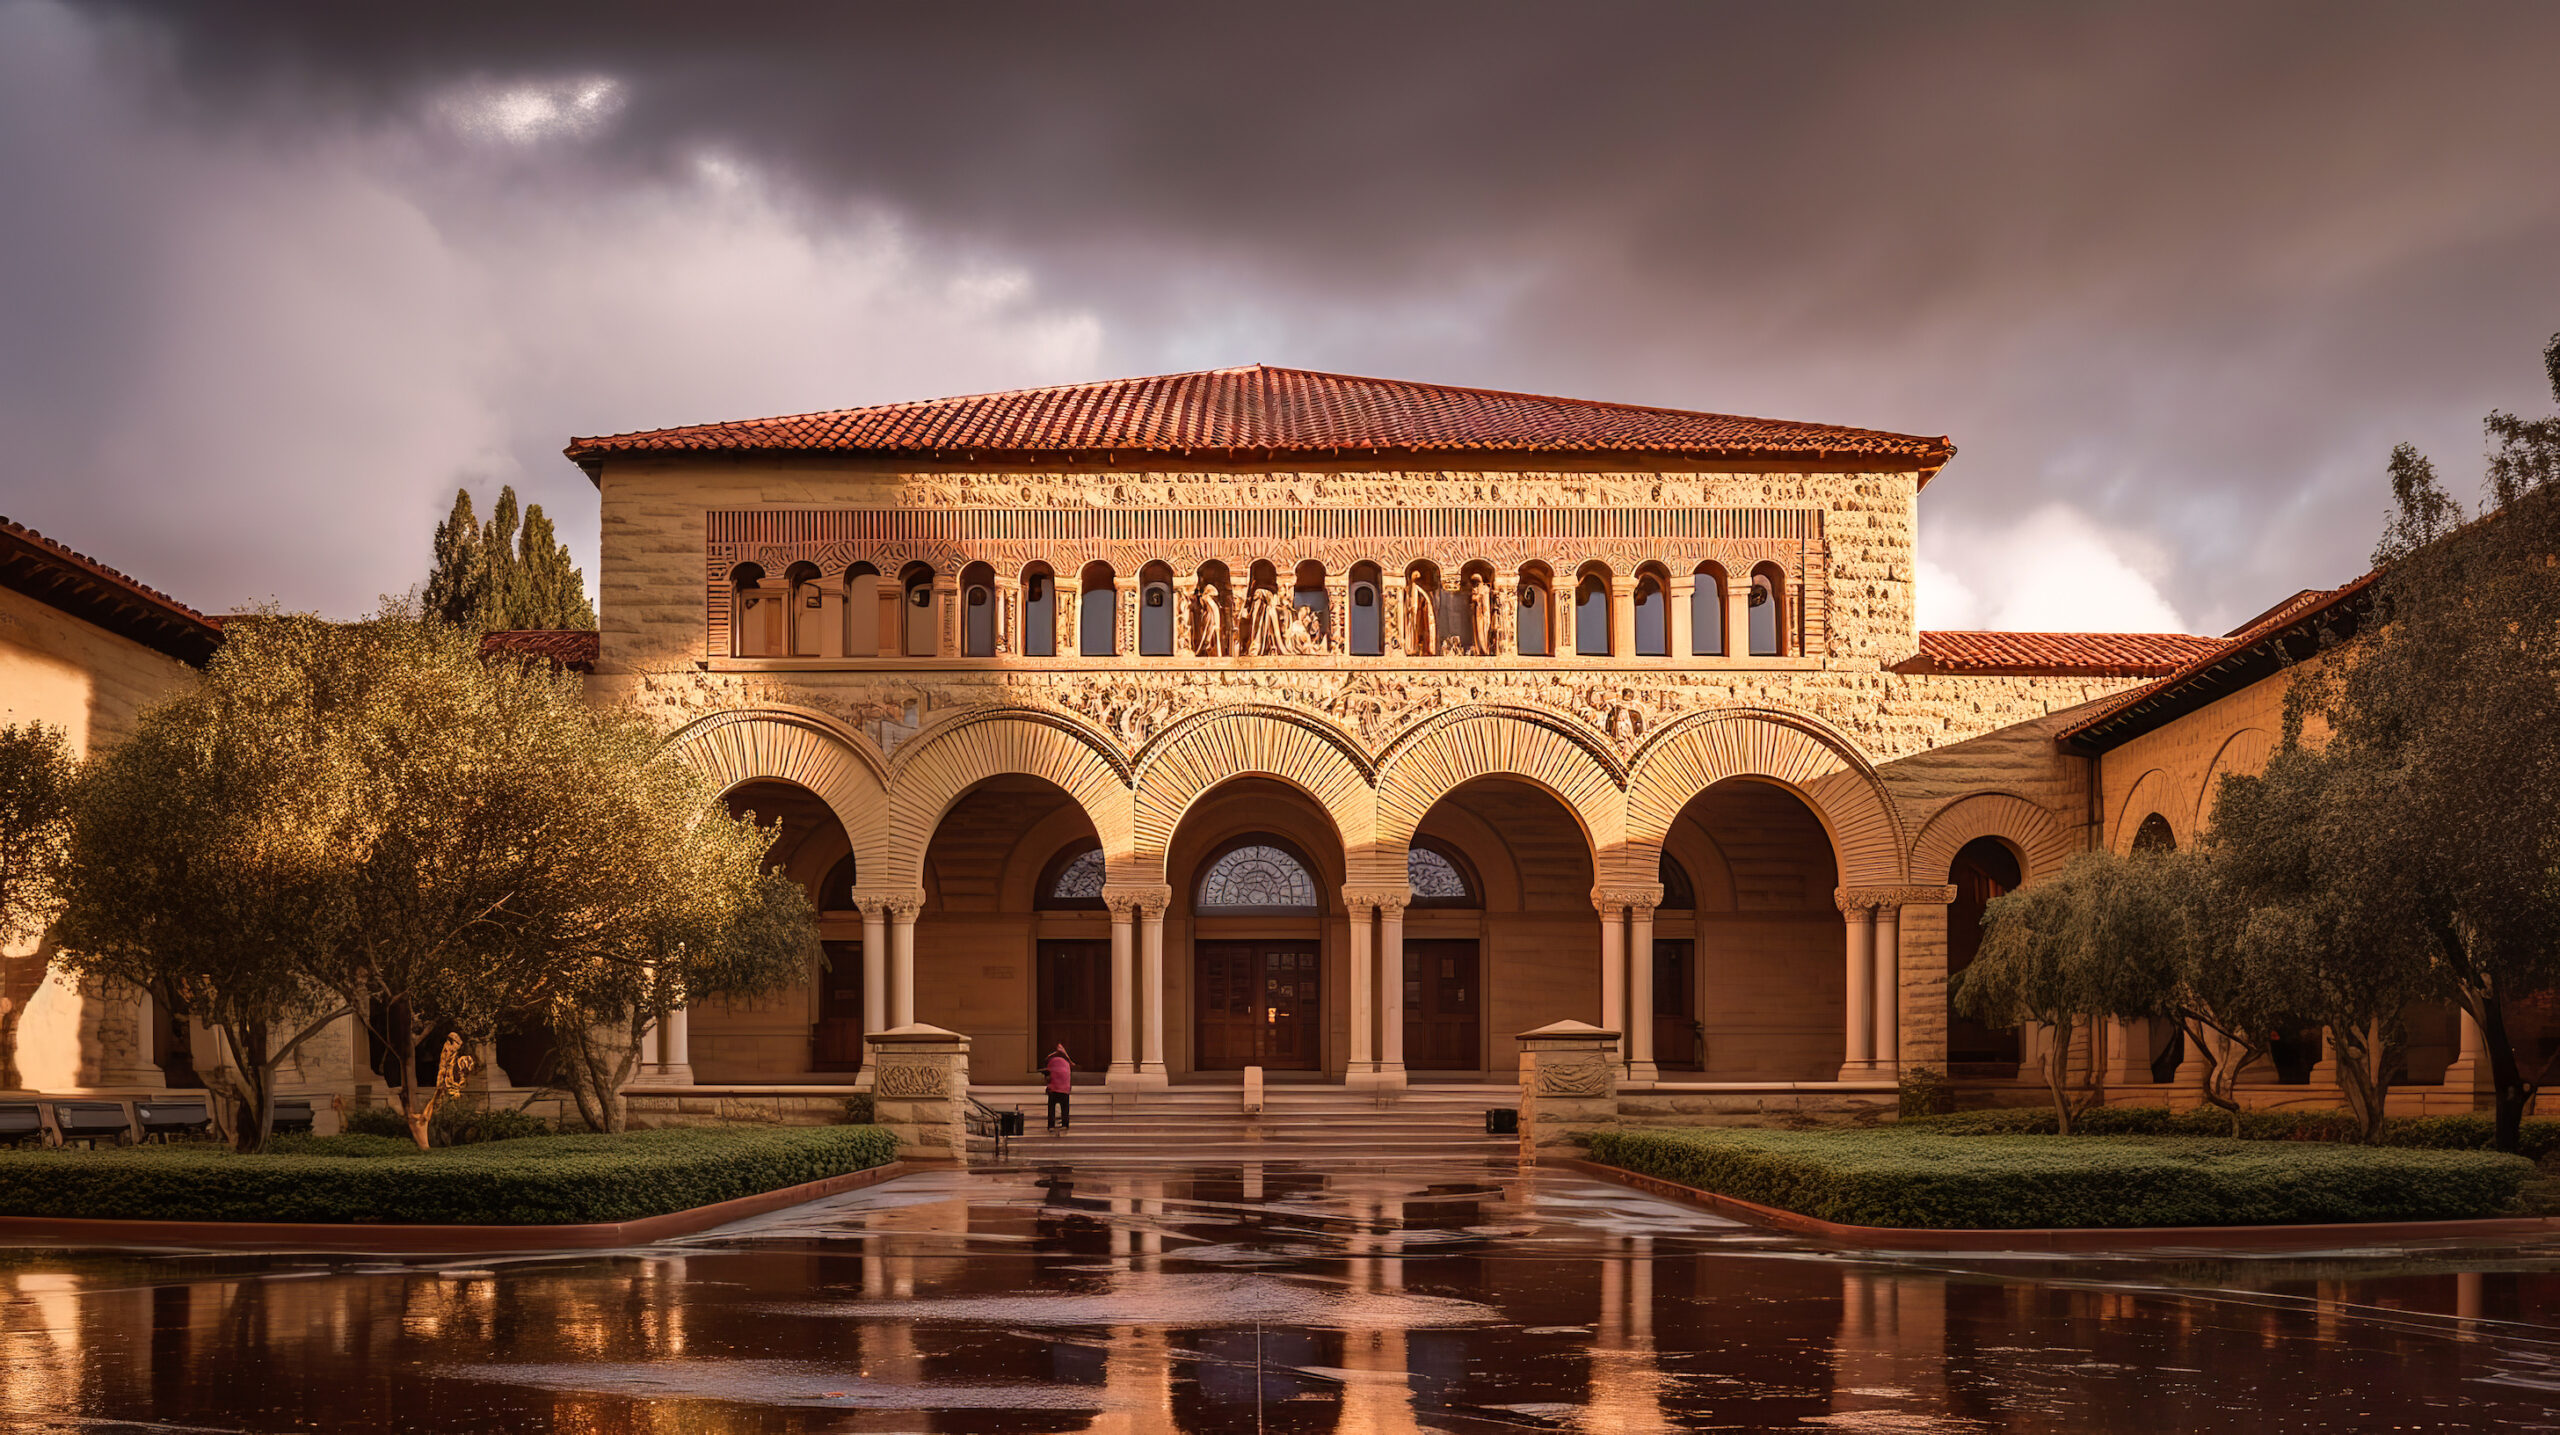 Stanford University - building and courtyard